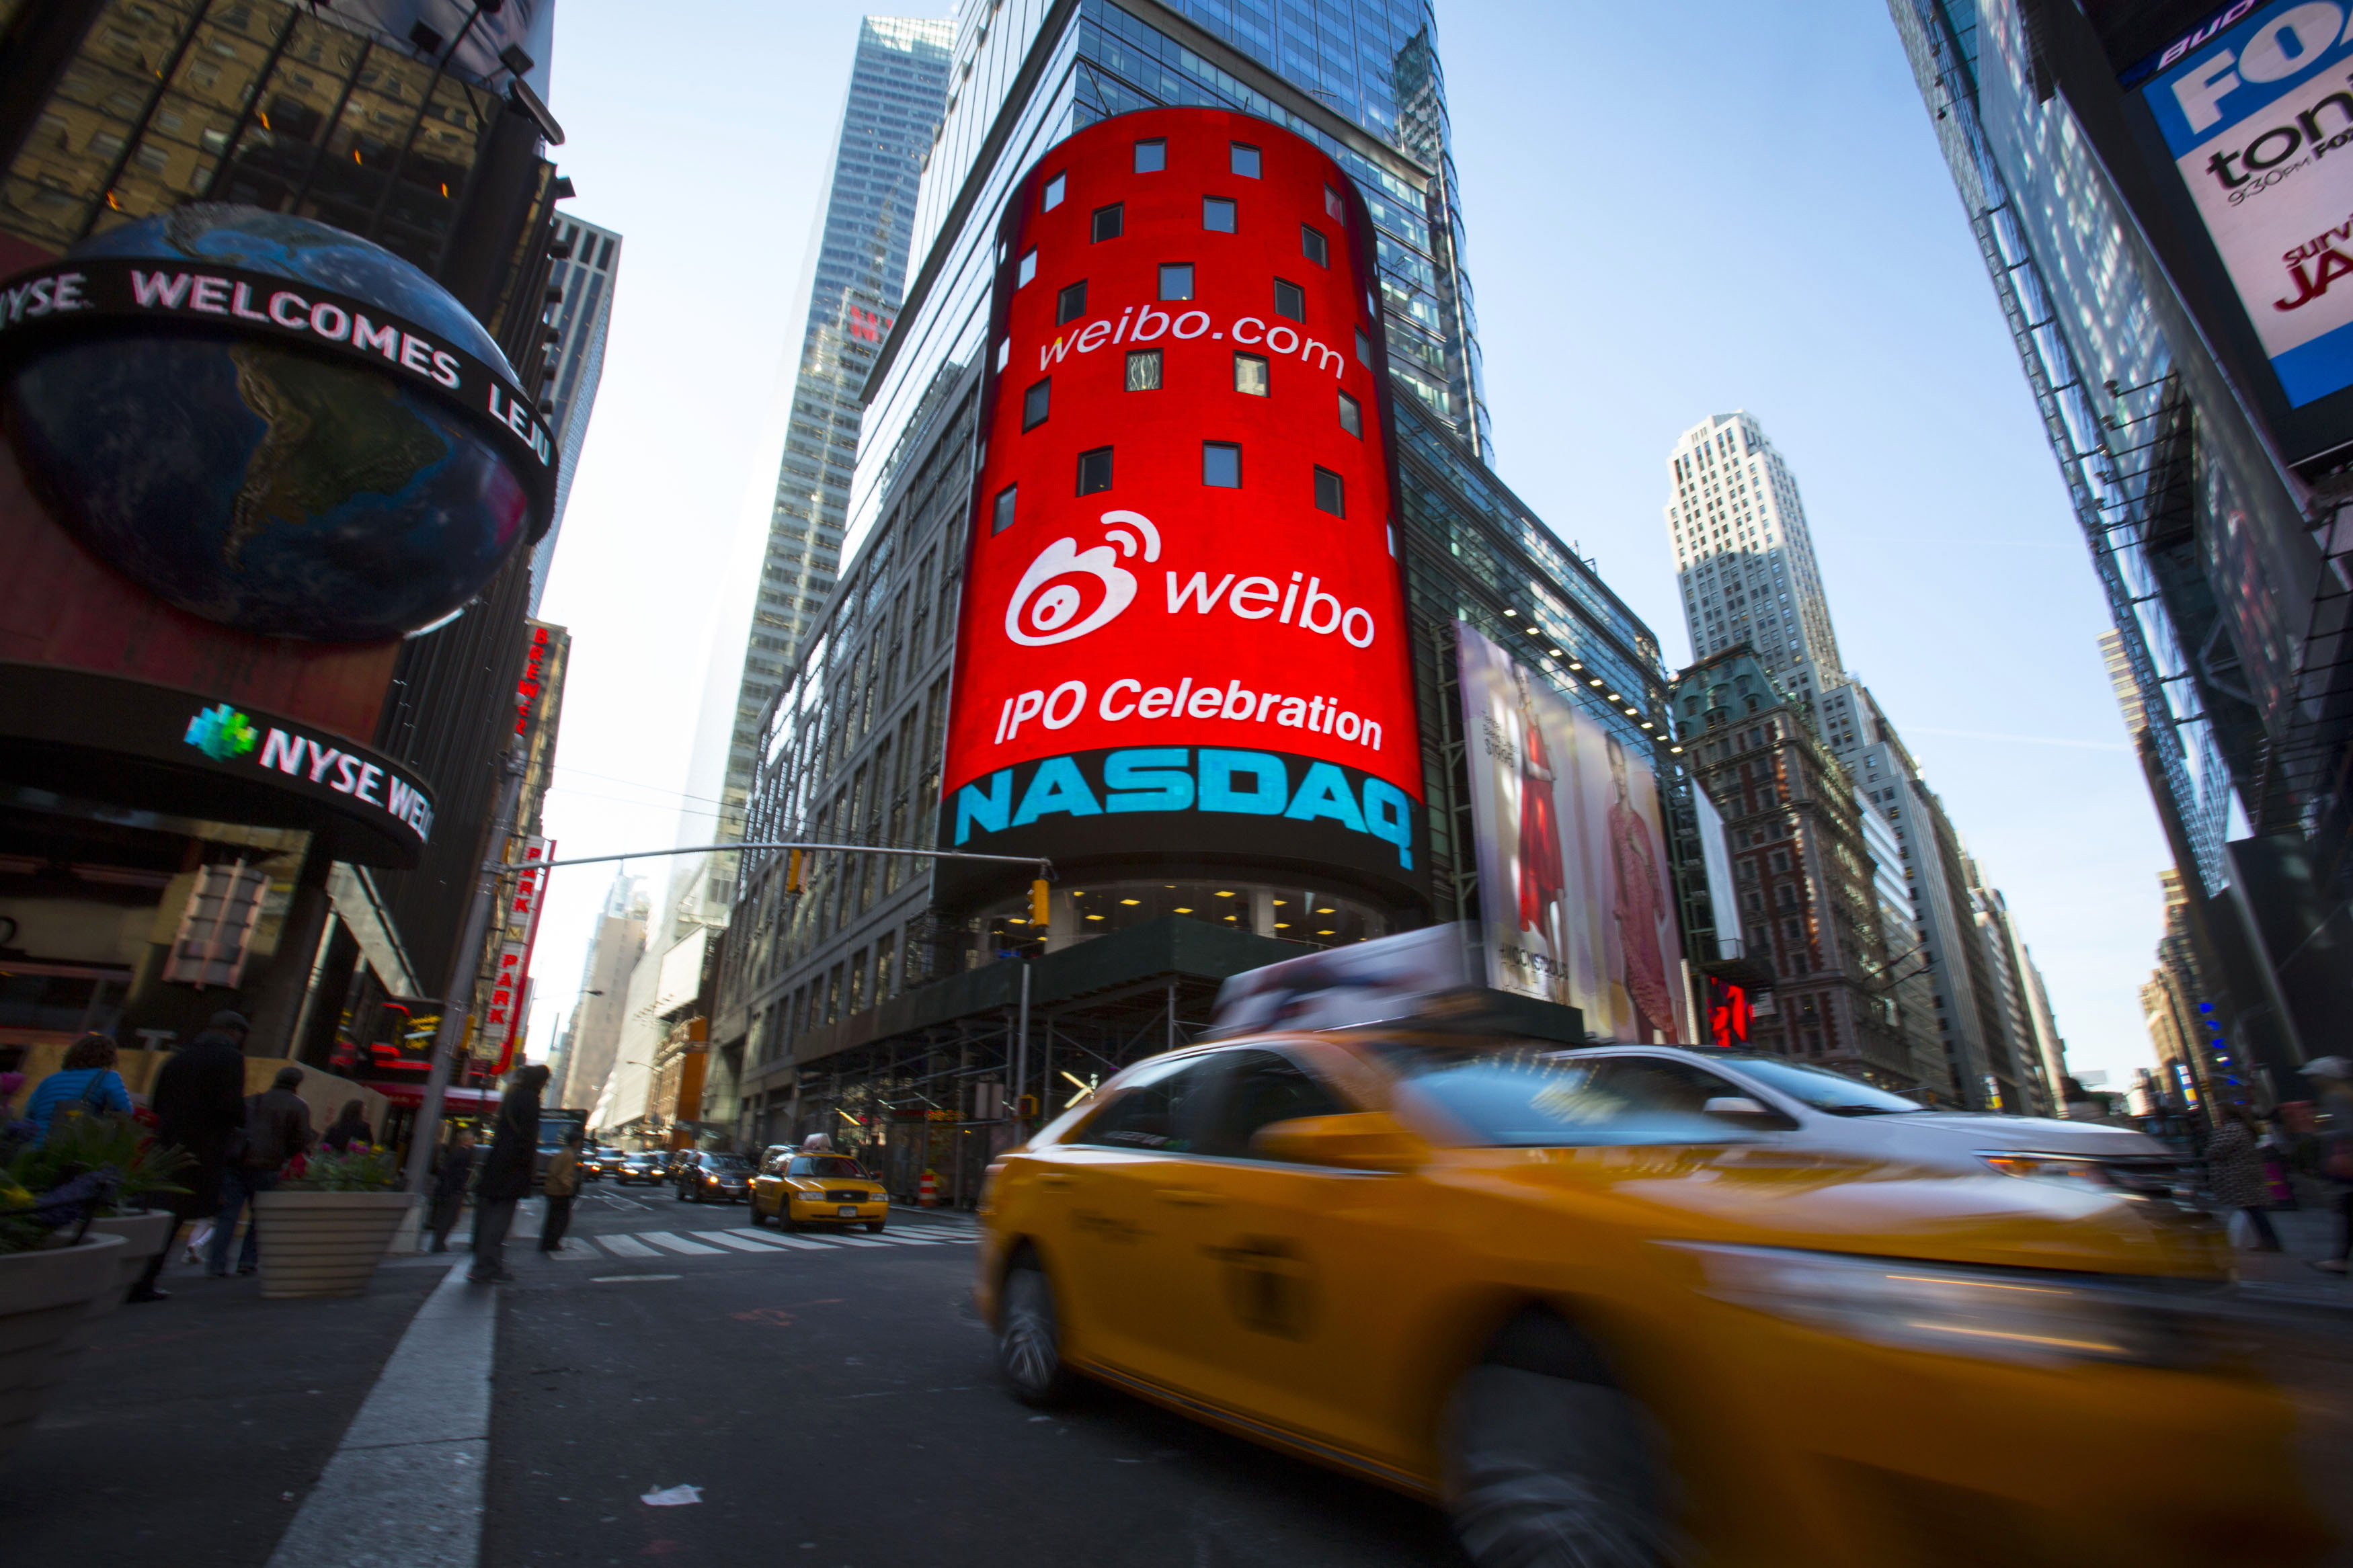 The Weibo logo is seen at the NASDAQ MarketSite in Times Square in celebration of its initial public offering (IPO) on The NASDAQ Stock Market in New York